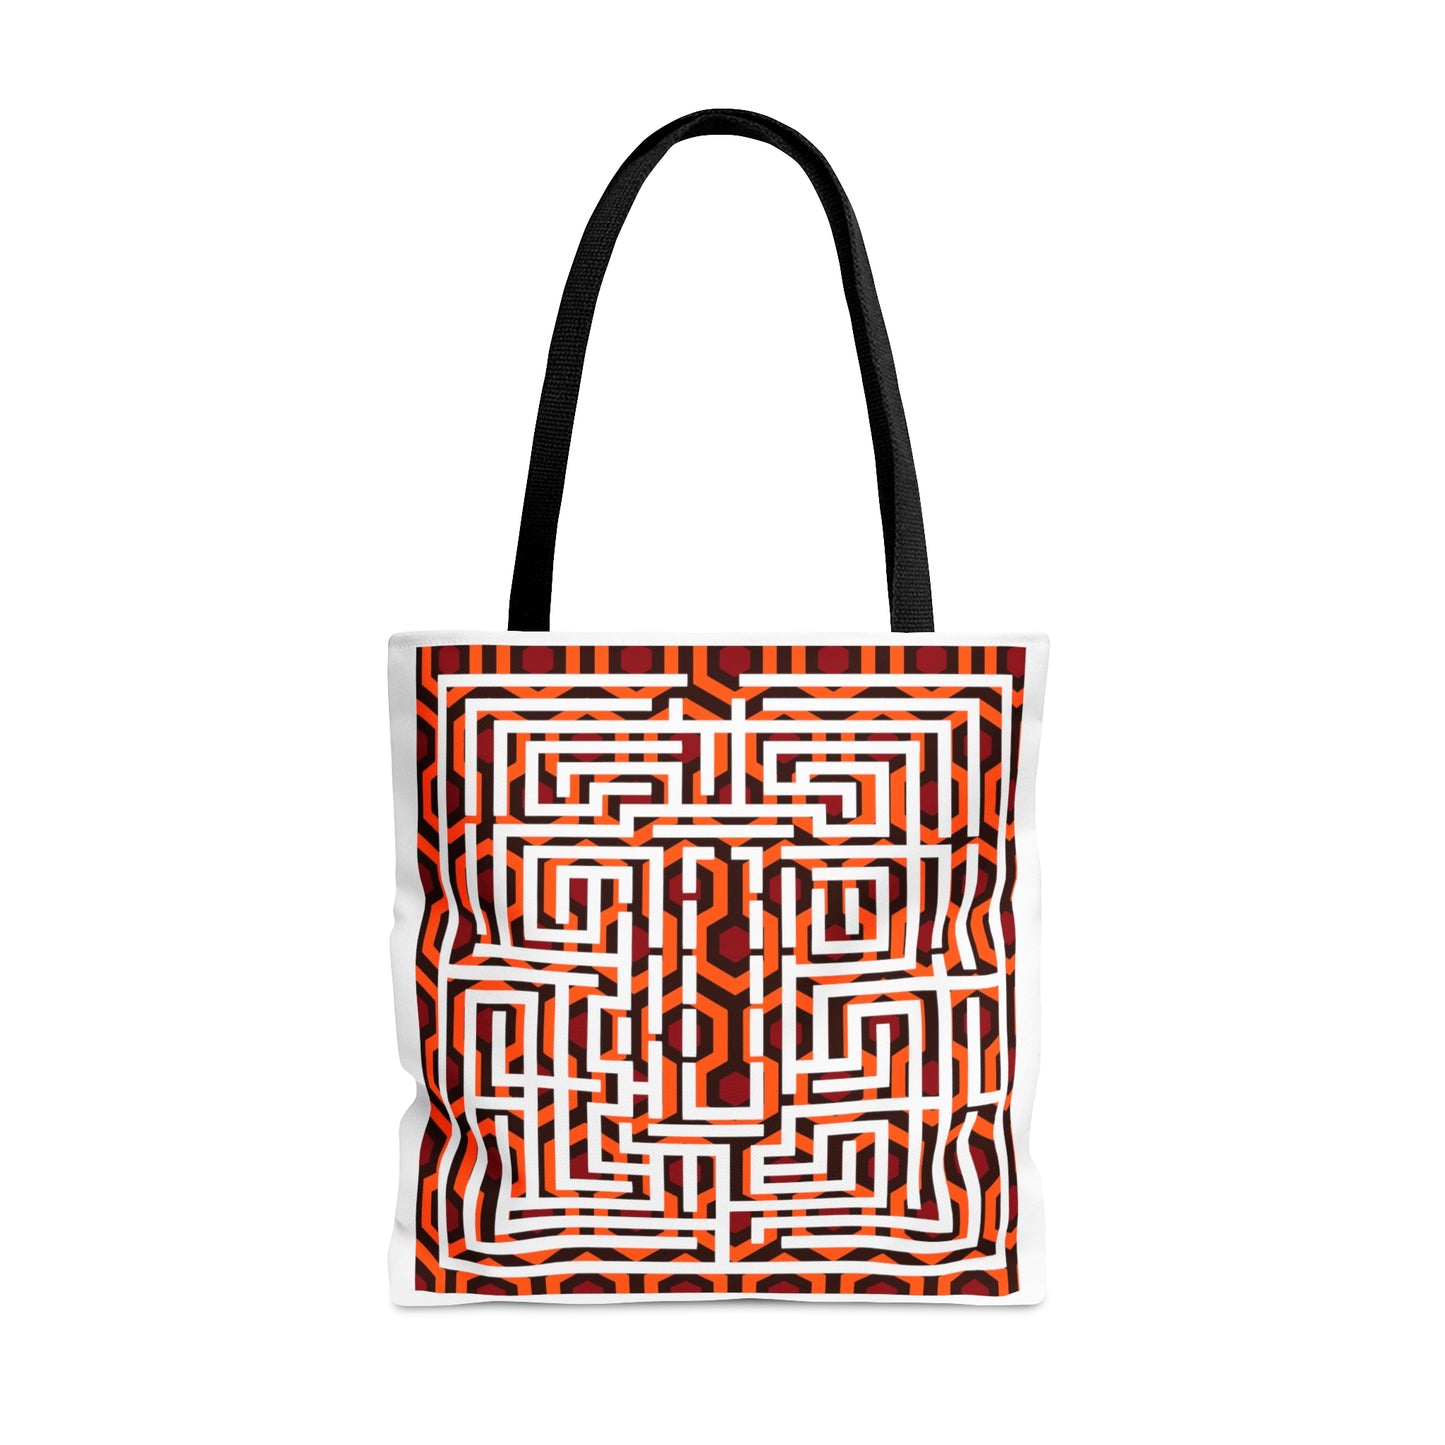 The Overlook Tote Bag